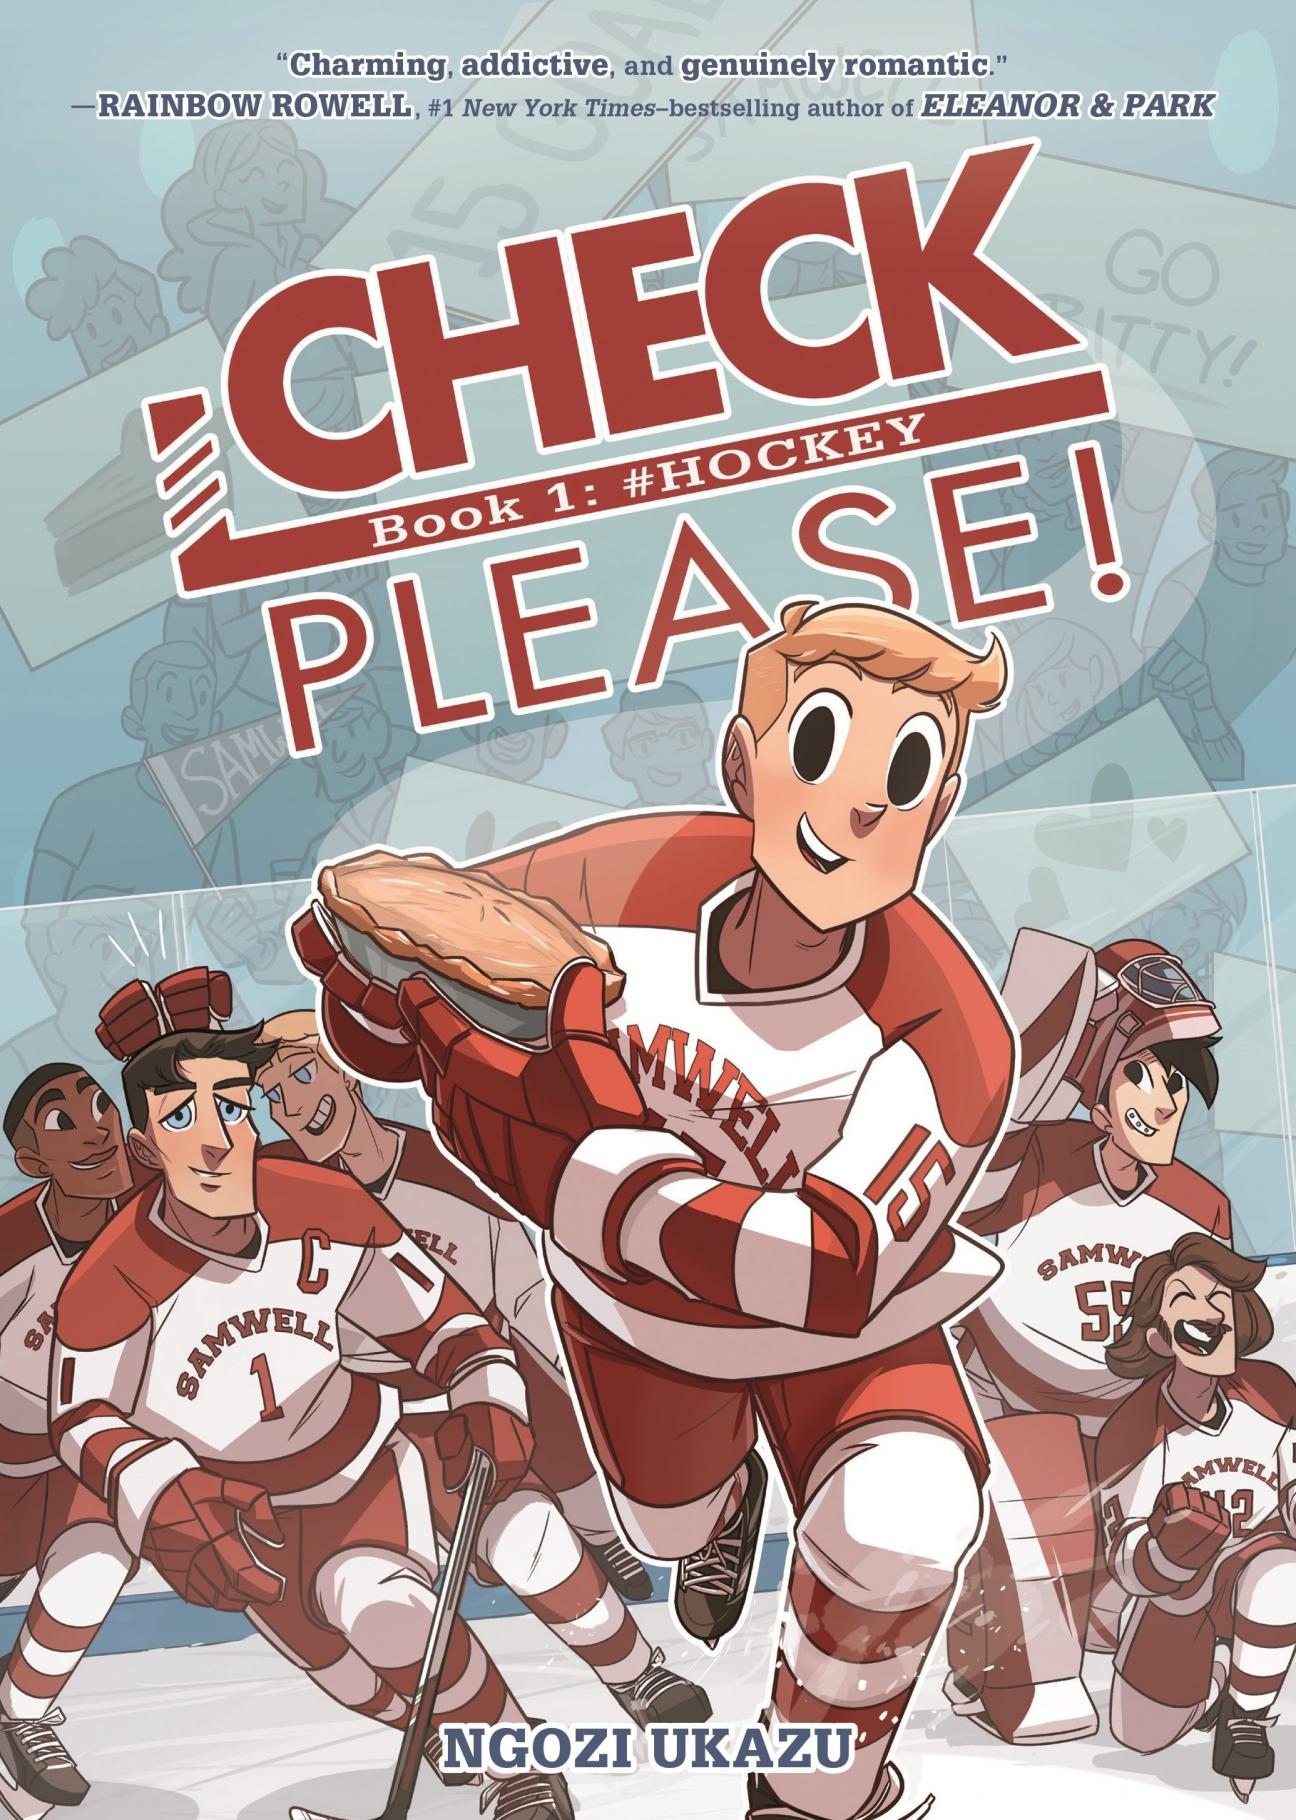 The cover of Check Please volume 1.